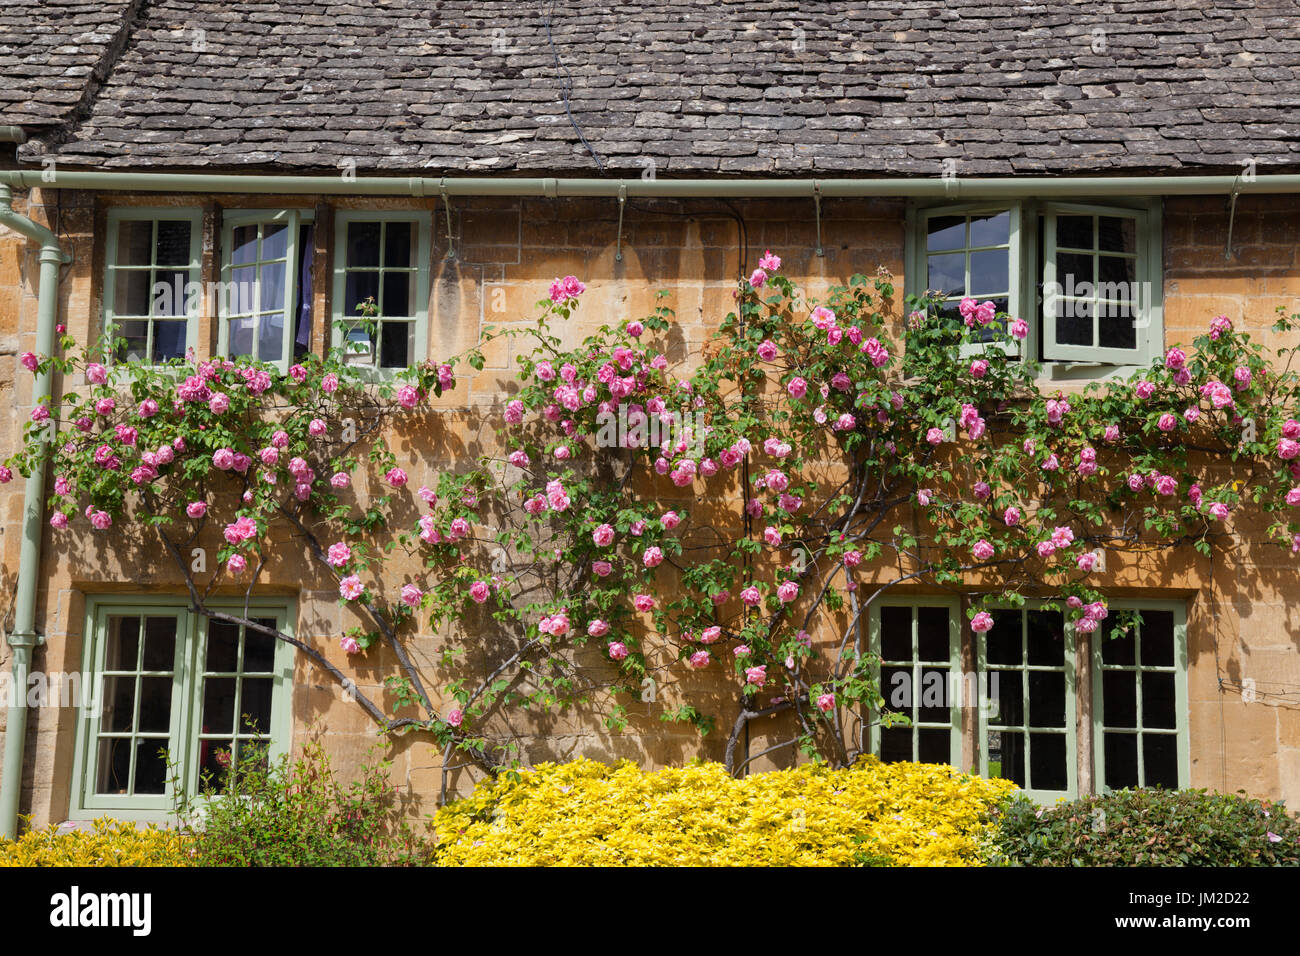 Roses rose sur cotswold cottage, Stanton, Cotswolds, Gloucestershire, Angleterre, Royaume-Uni, Europe Banque D'Images